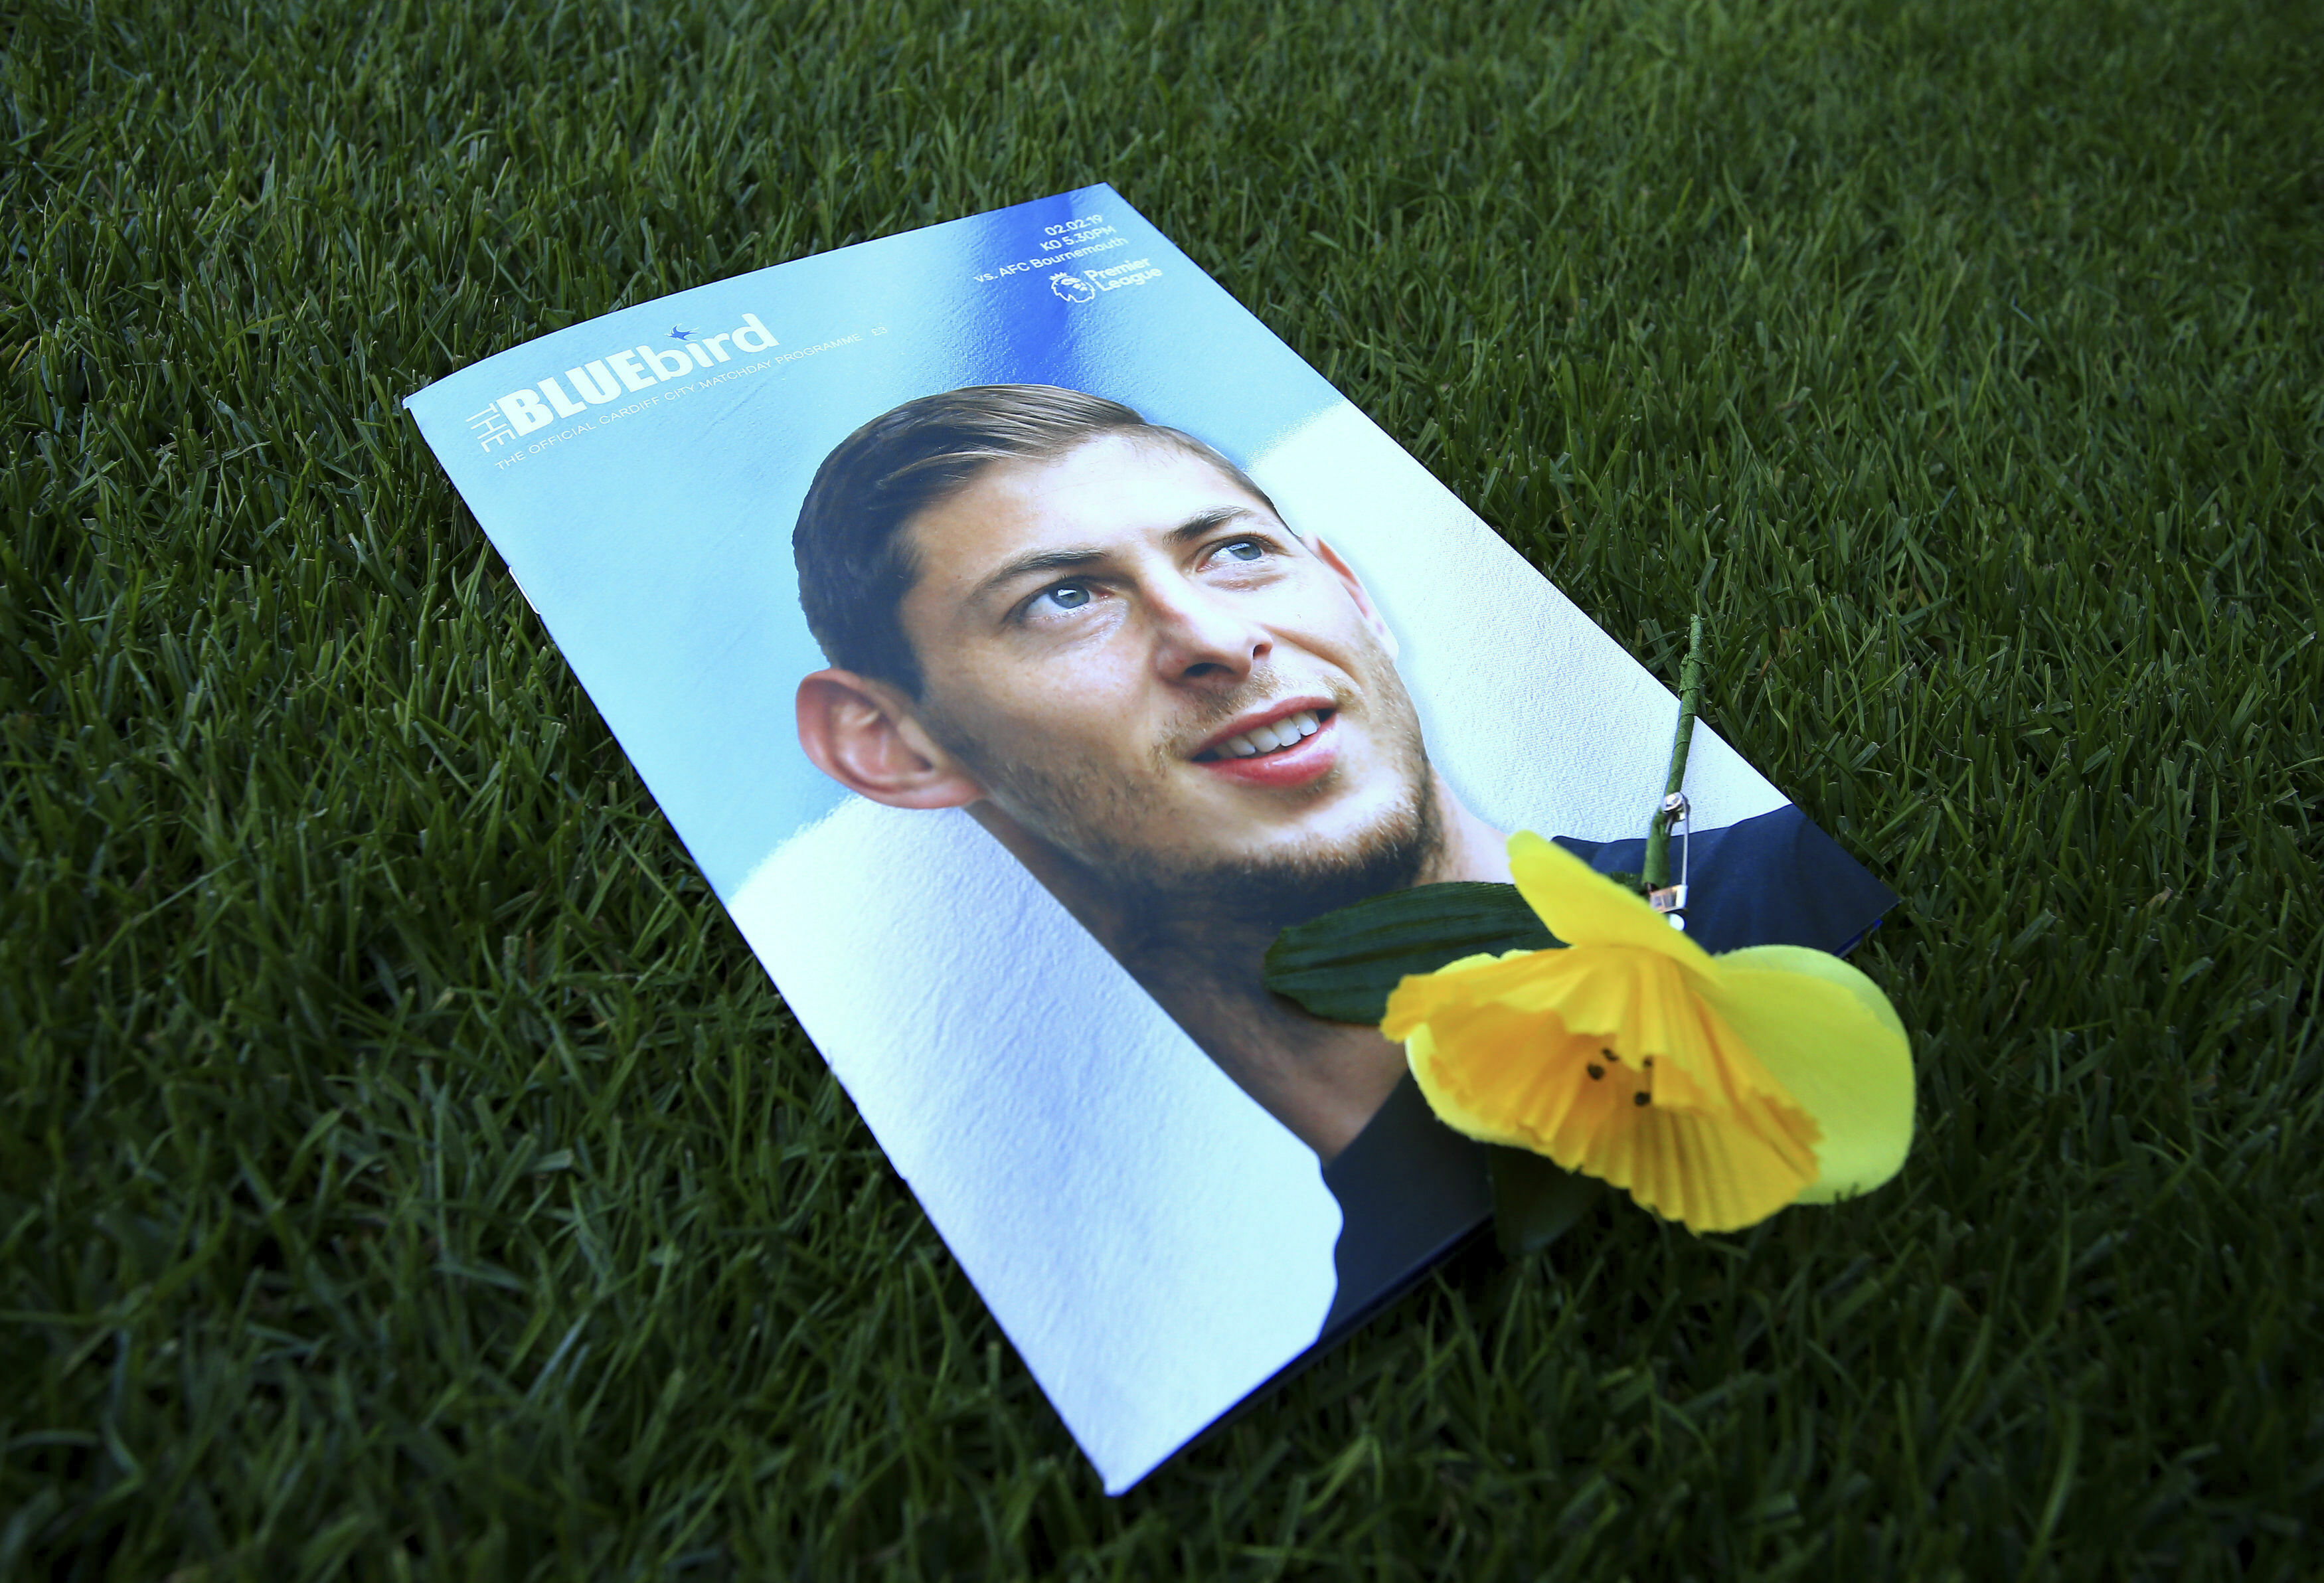 Cardiff pays tribute to Sala in 2-0 win over Bournemouth